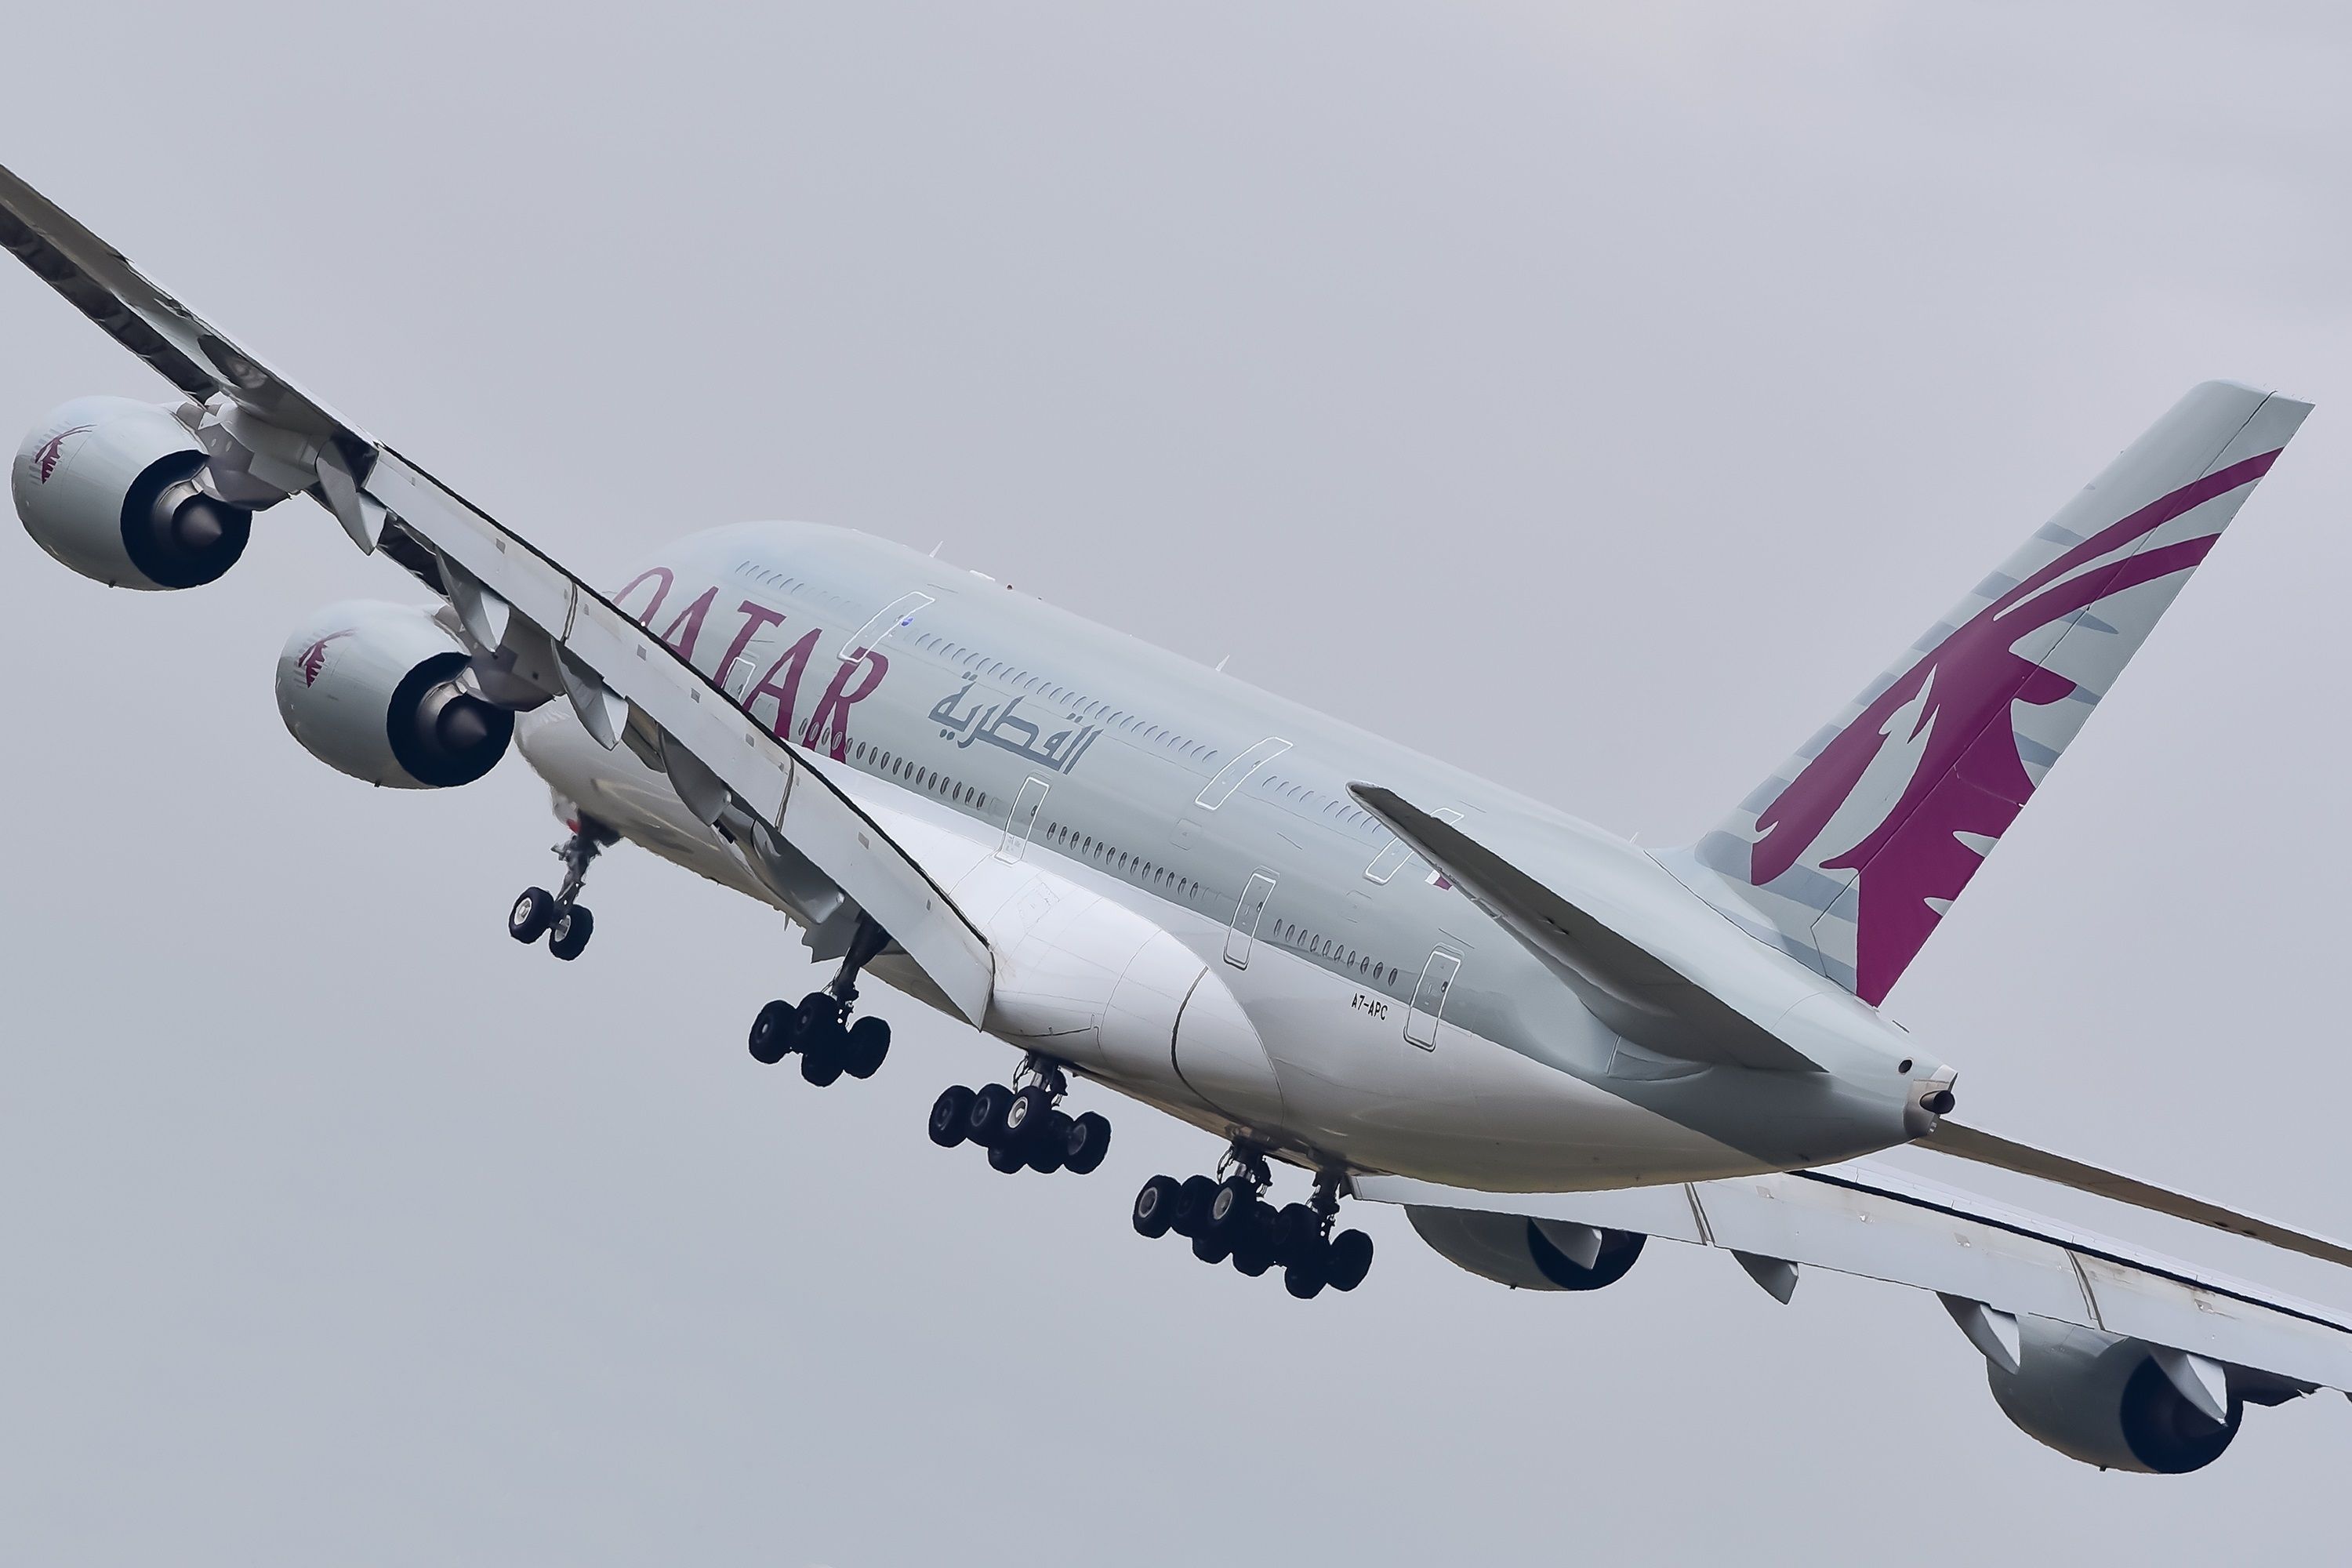 A Qatar Airways Airbus A380 flying in the sky.